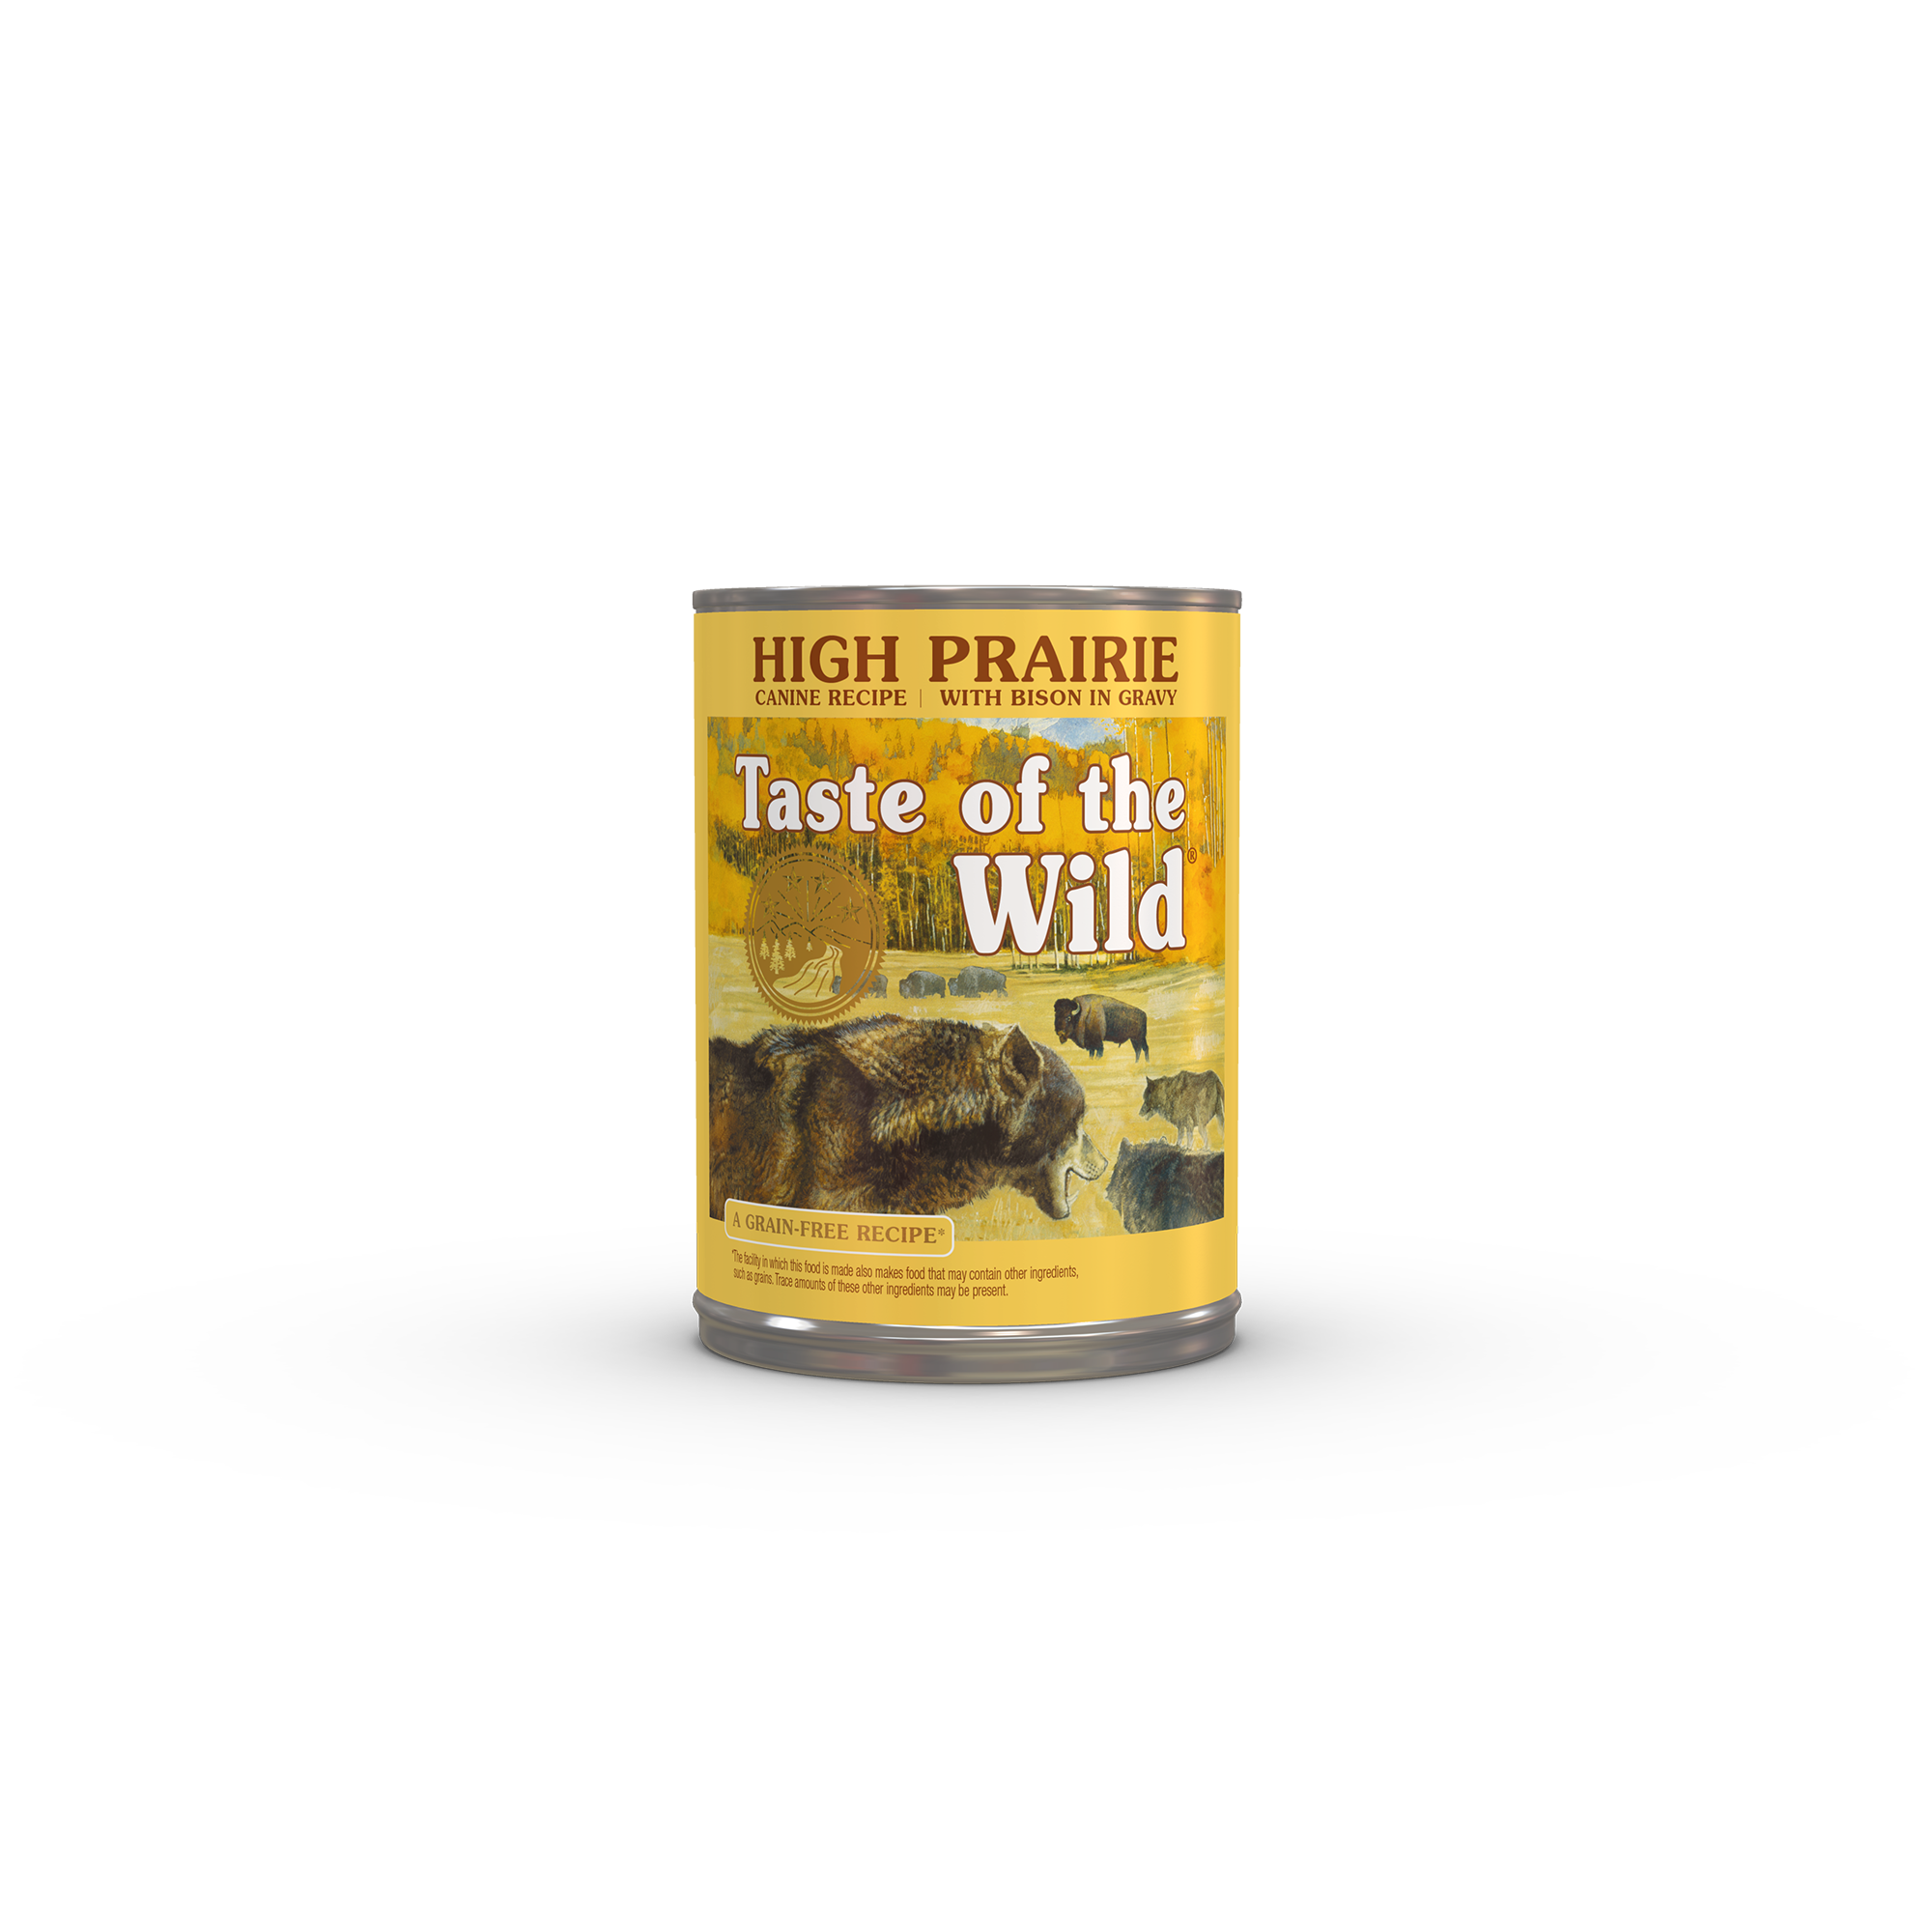 A can of High Prairie Canine Recipe with Bison in Gravy.